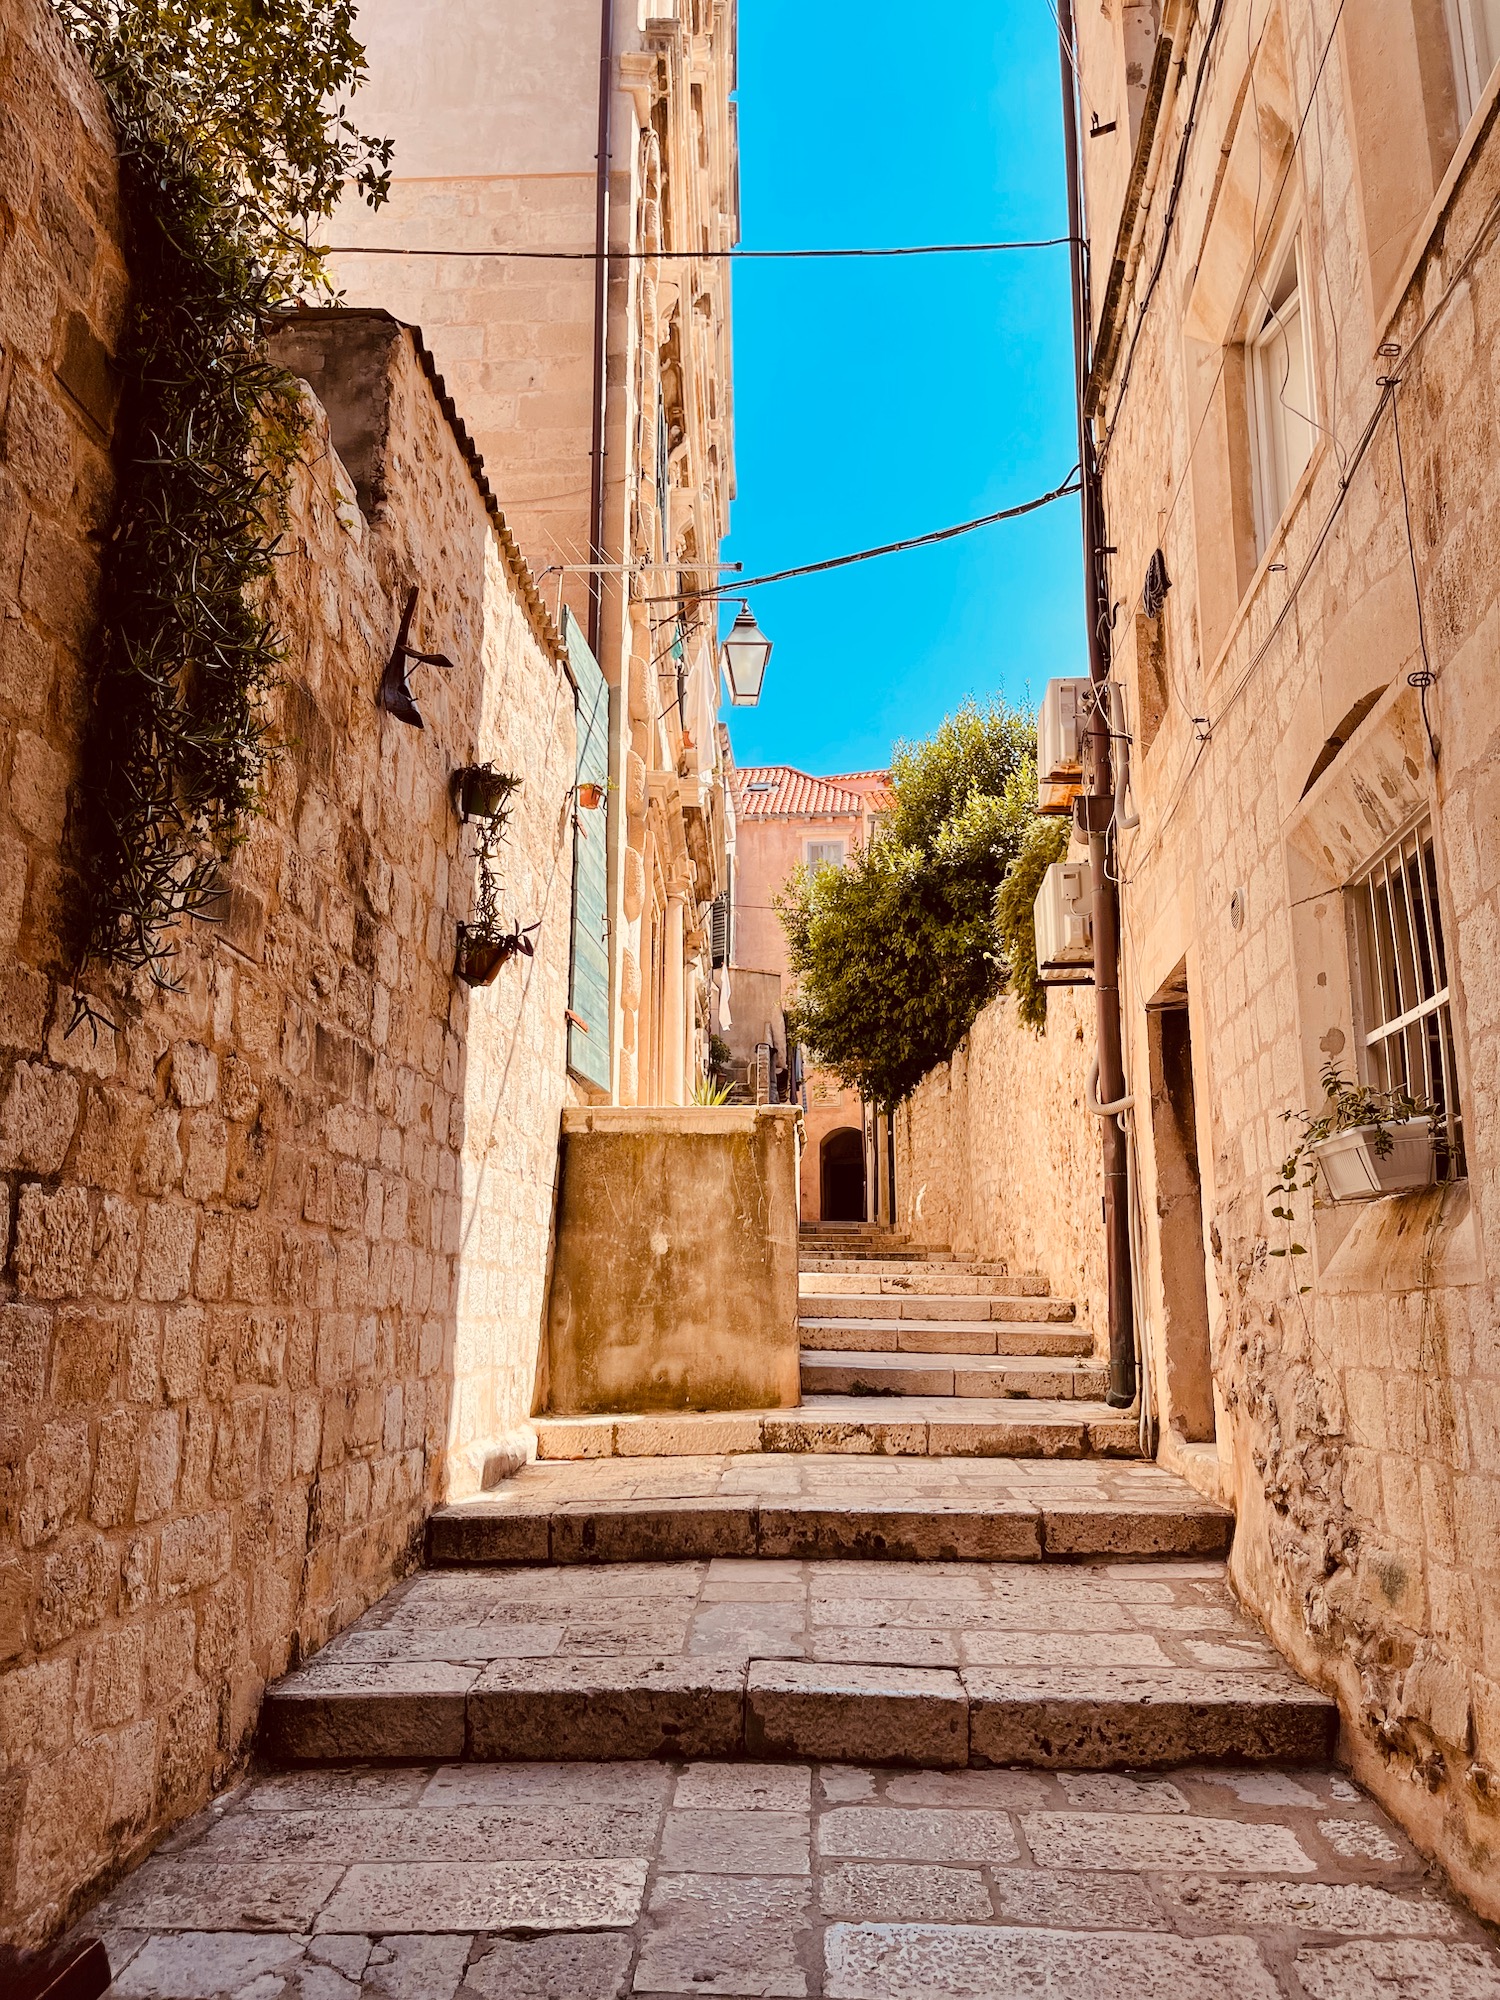 a stone alleyway with stairs and buildings